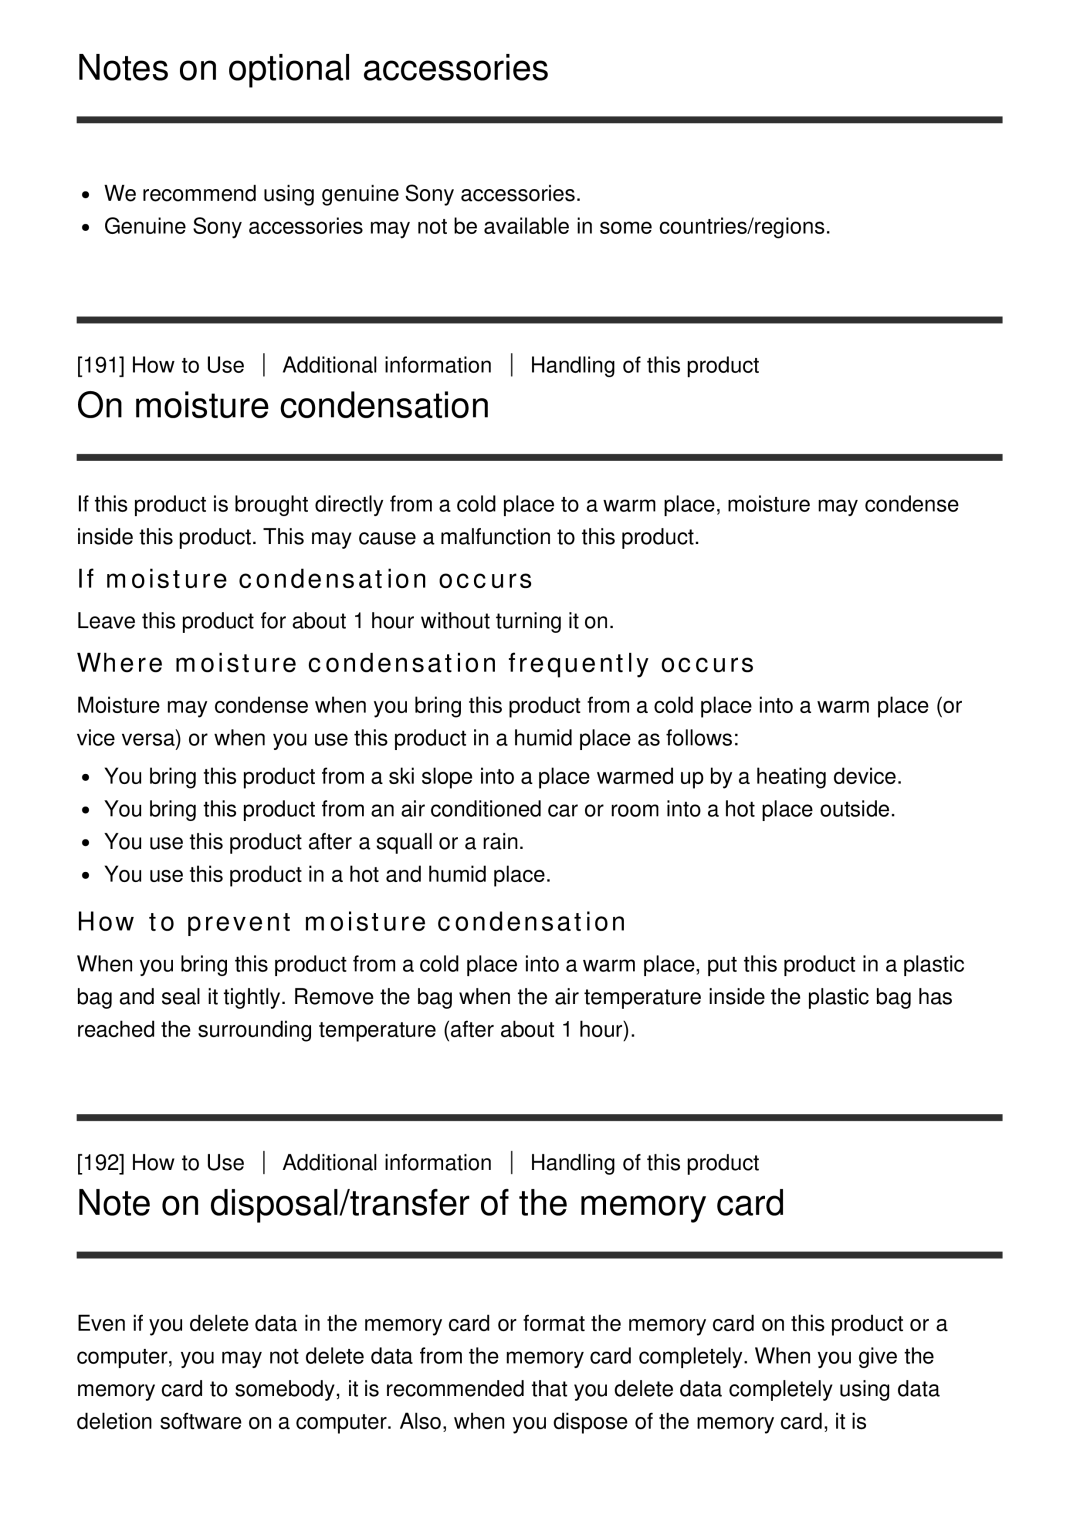 Sony HDR-CX900 manual Notes on optional accessories, On moisture condensation, Note on disposal/transfer of the memory card 